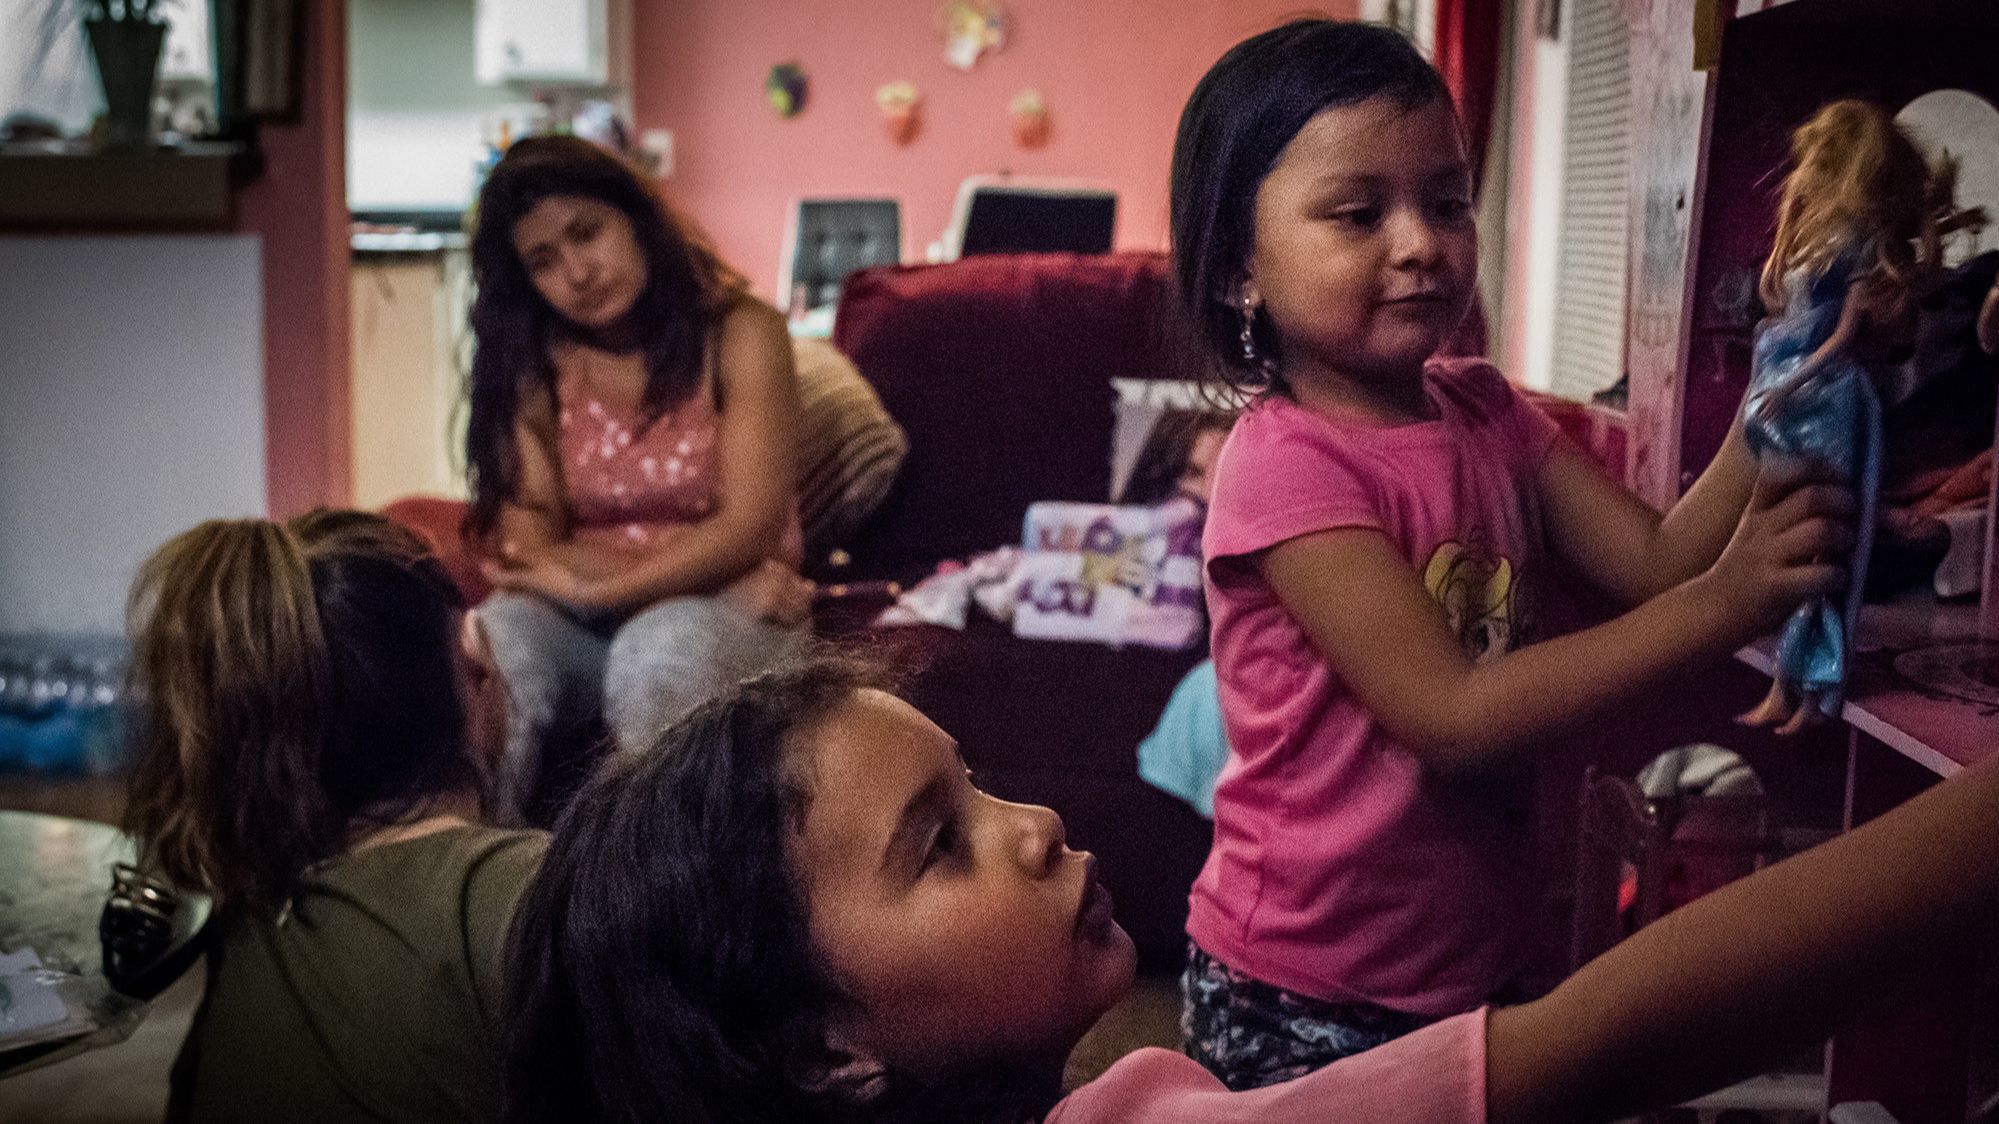 NORTHRIDGE, CA - June 19, 2018 Marley, center, and Kati play with a dollhouse while their mothers,